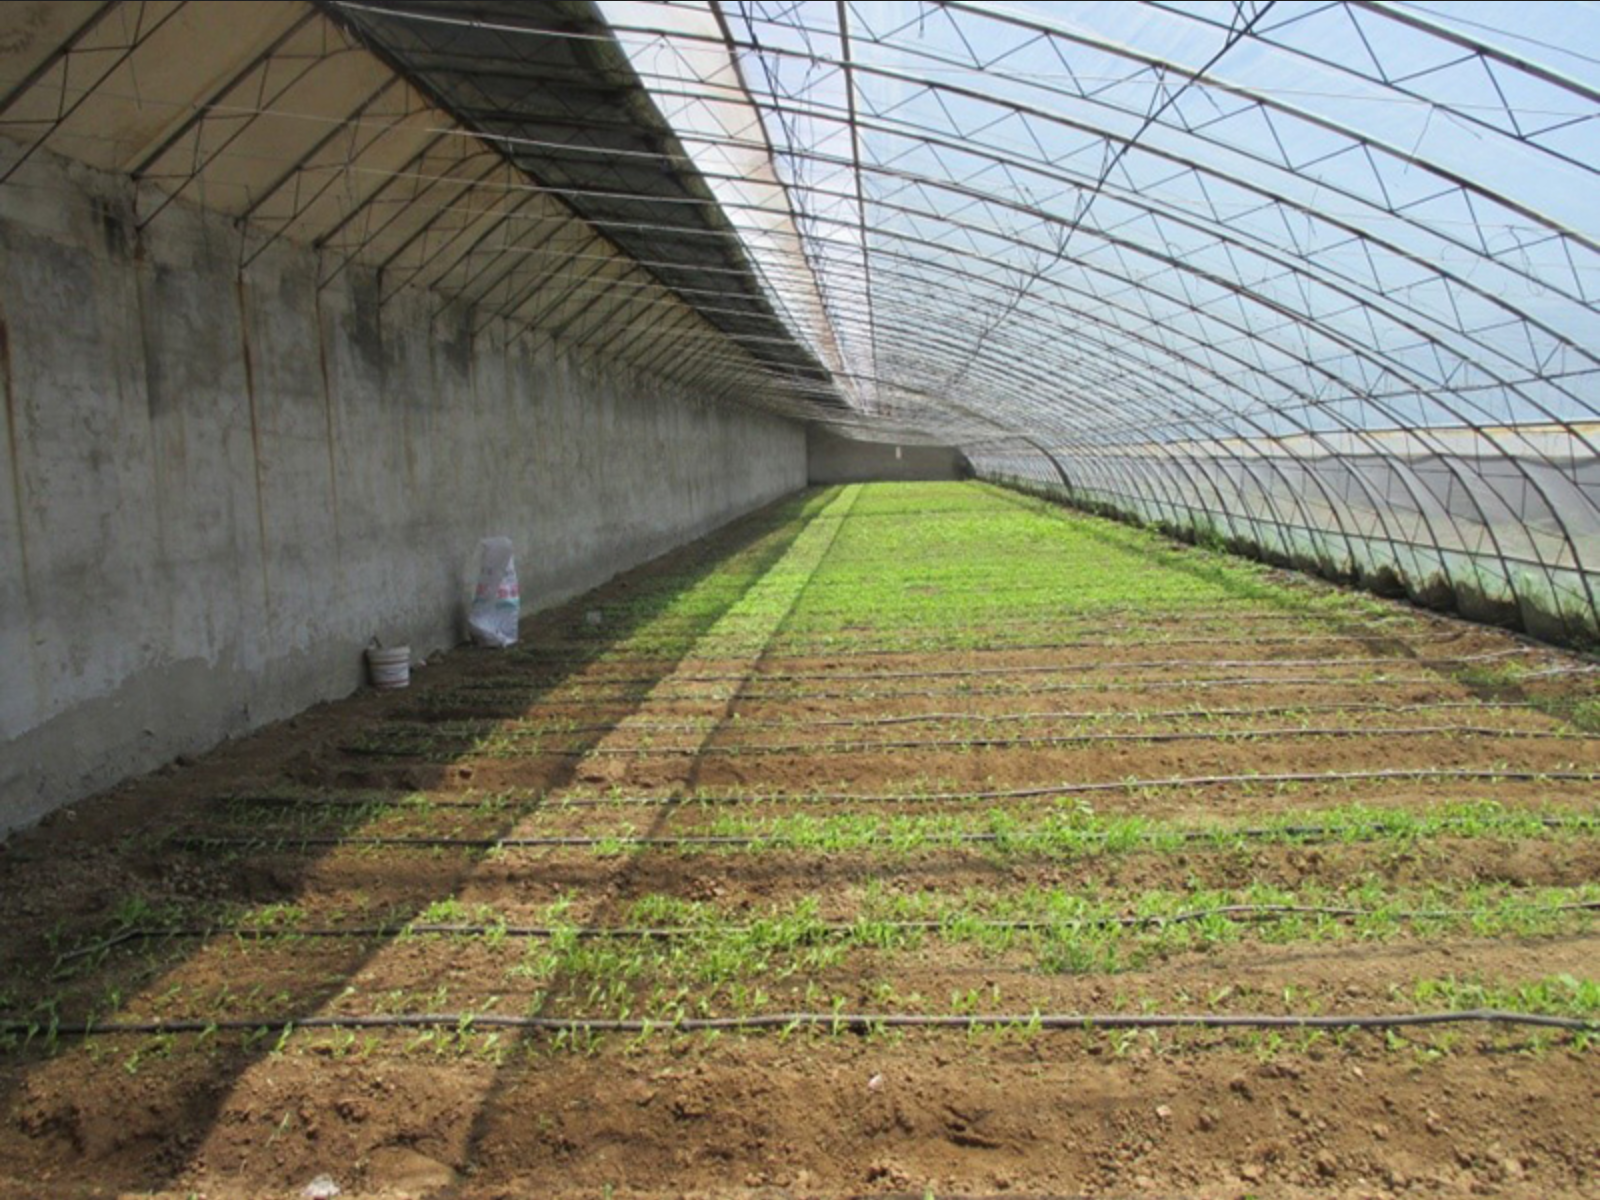 Leafy vegetables grown in a Chinese-style solar greenhouse.